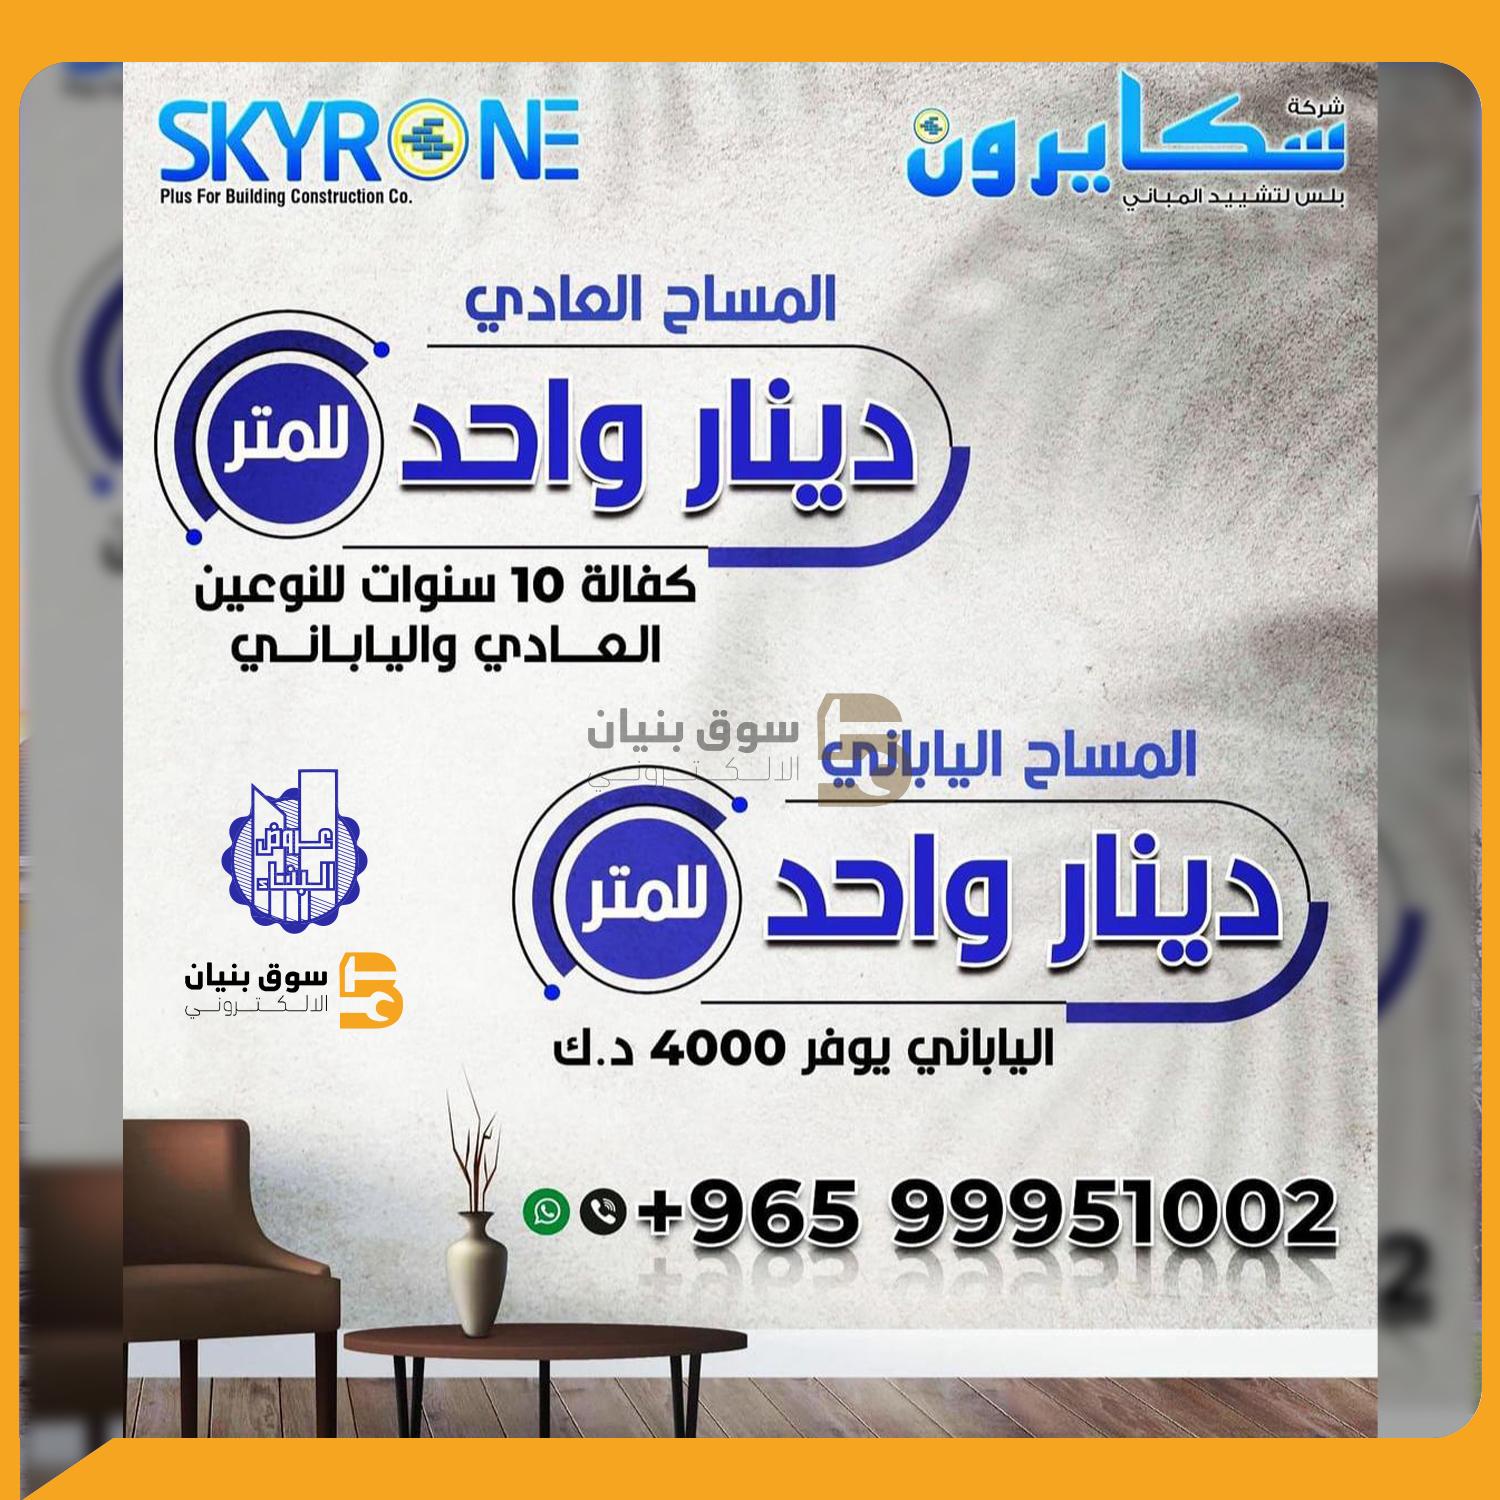 Offers from Skyrone Plus for building construction co.